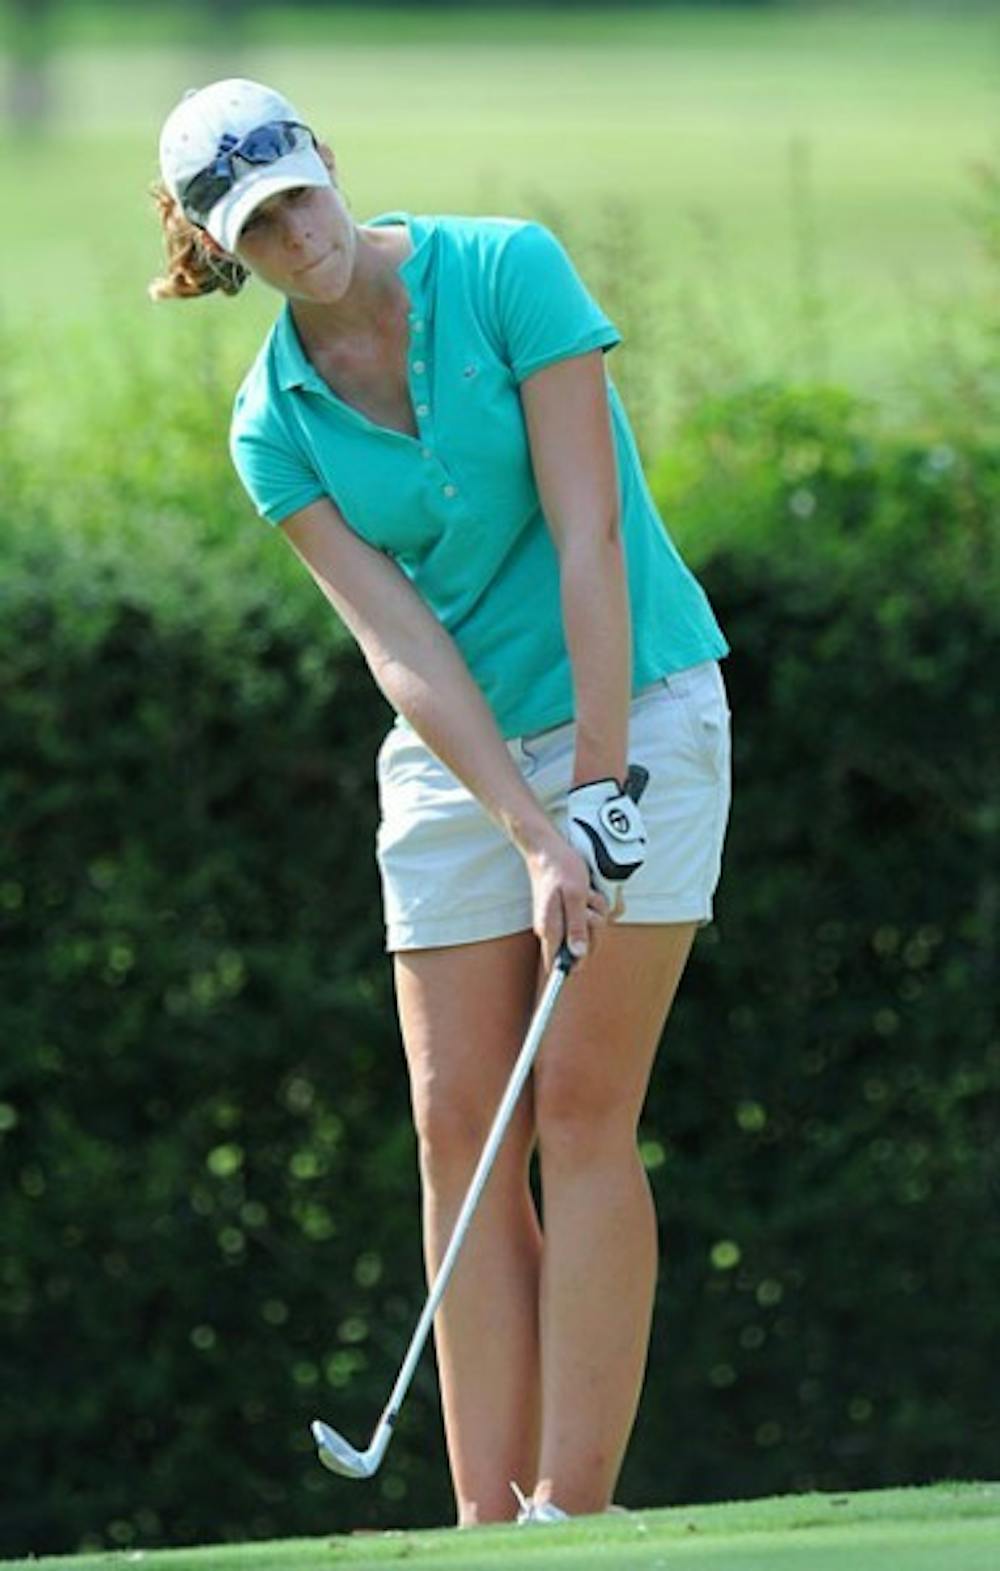 <p>Senior Isabelle Lendl chips a shot onto the green. Lendl finished tied for 32nd at the Bryan National Collegiate this weekend.</p>